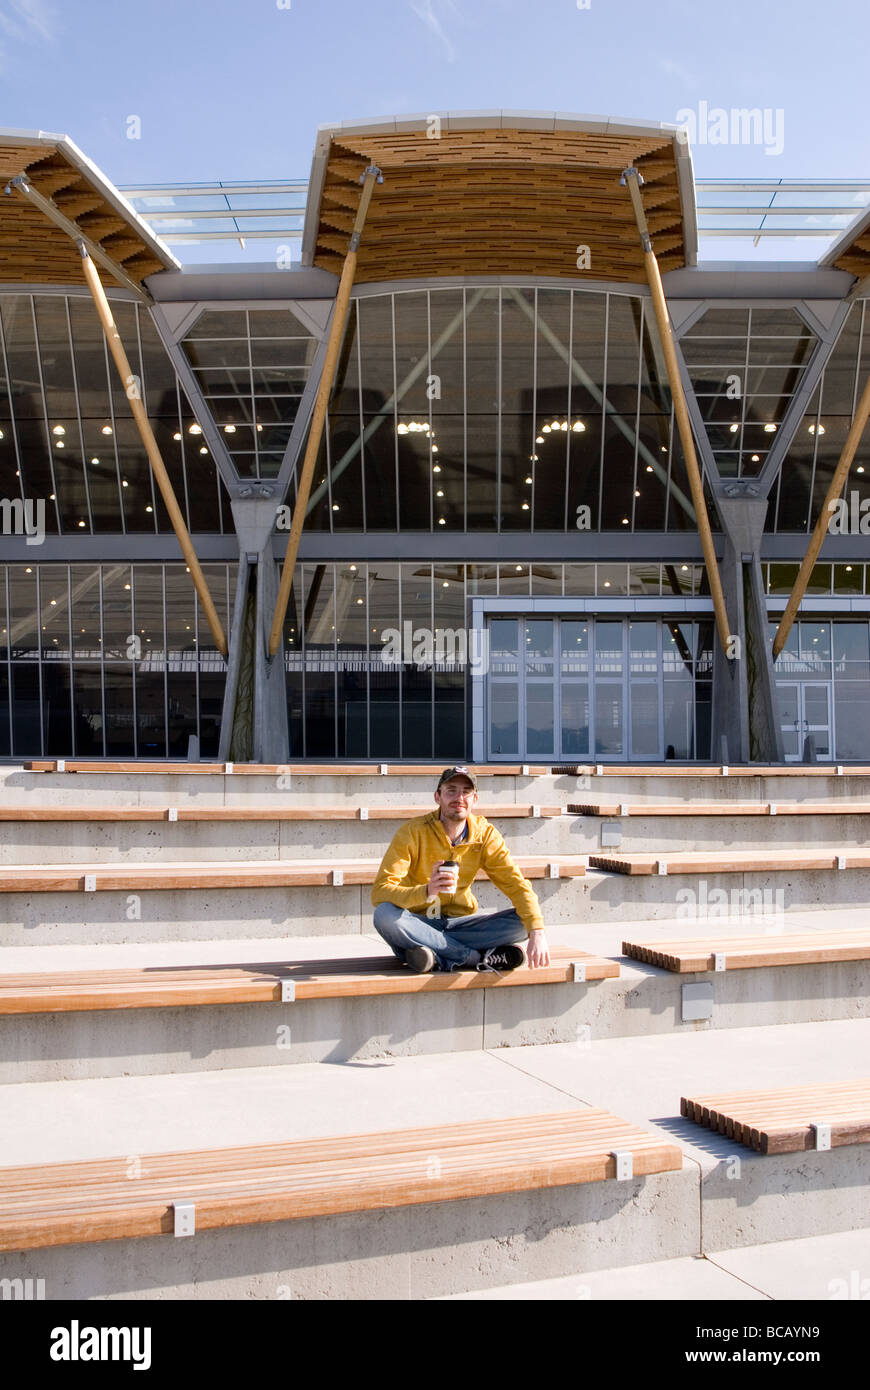 Building exterior of man outside Richmond Olympic Oval, Richmond, British Columbia, Canada Stock Photo